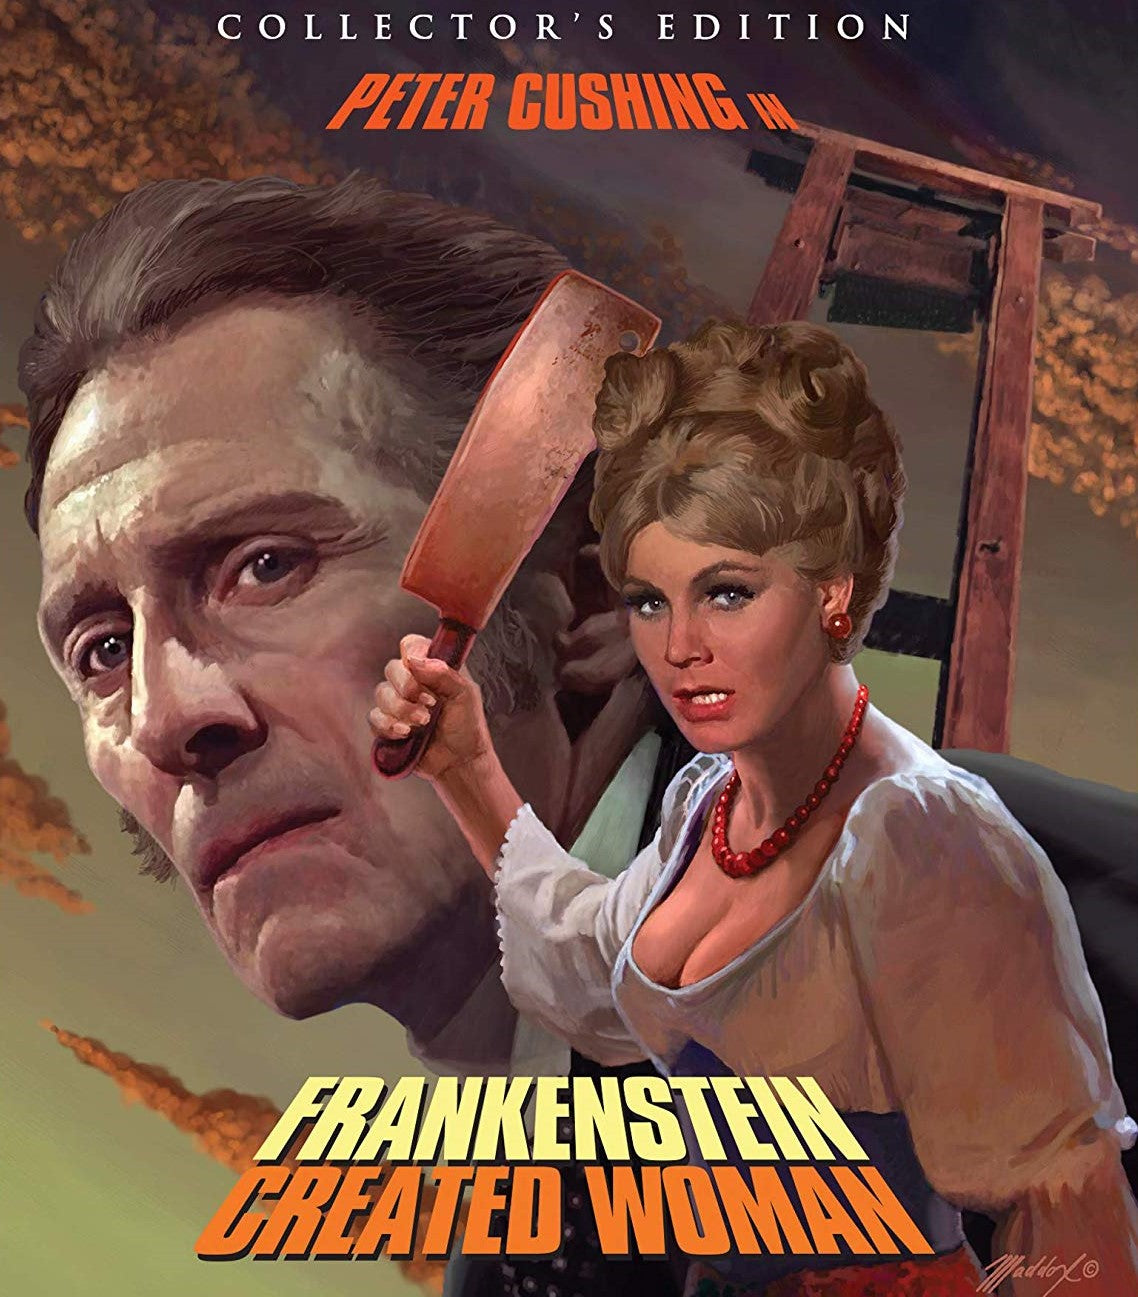 Frankenstein Created Woman (Collectors Edition) Blu-Ray Blu-Ray